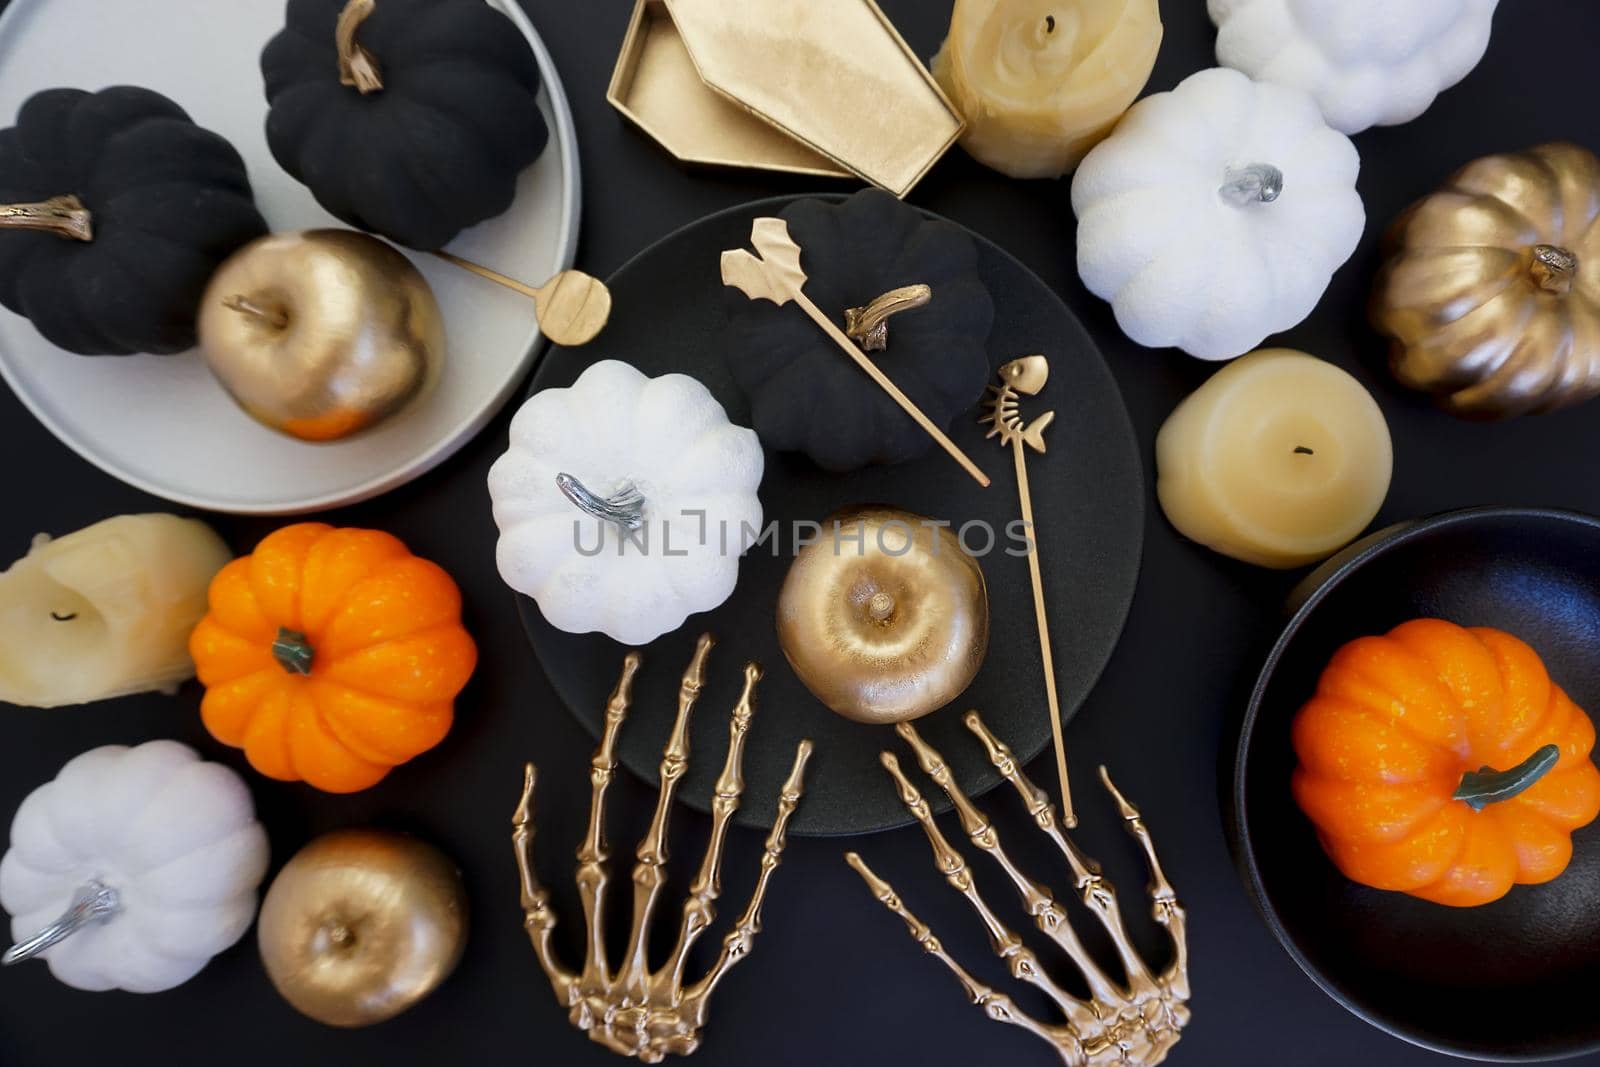 Creative photos for Halloween and for the Day of the dead. On the black table there are black dishes with pumpkins and golden apples.